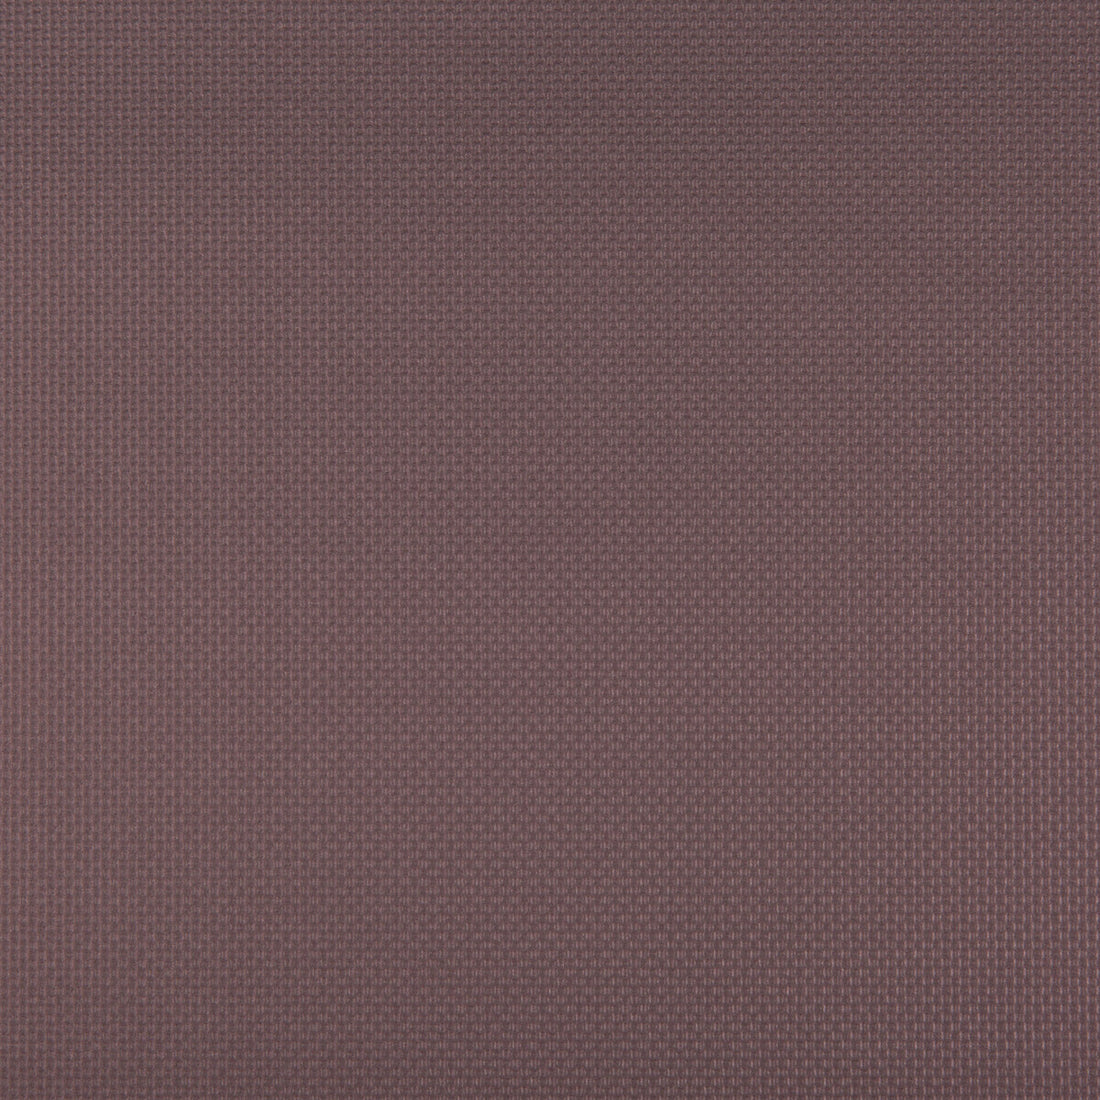 Sidney fabric in eggplant color - pattern SIDNEY.1010.0 - by Kravet Contract